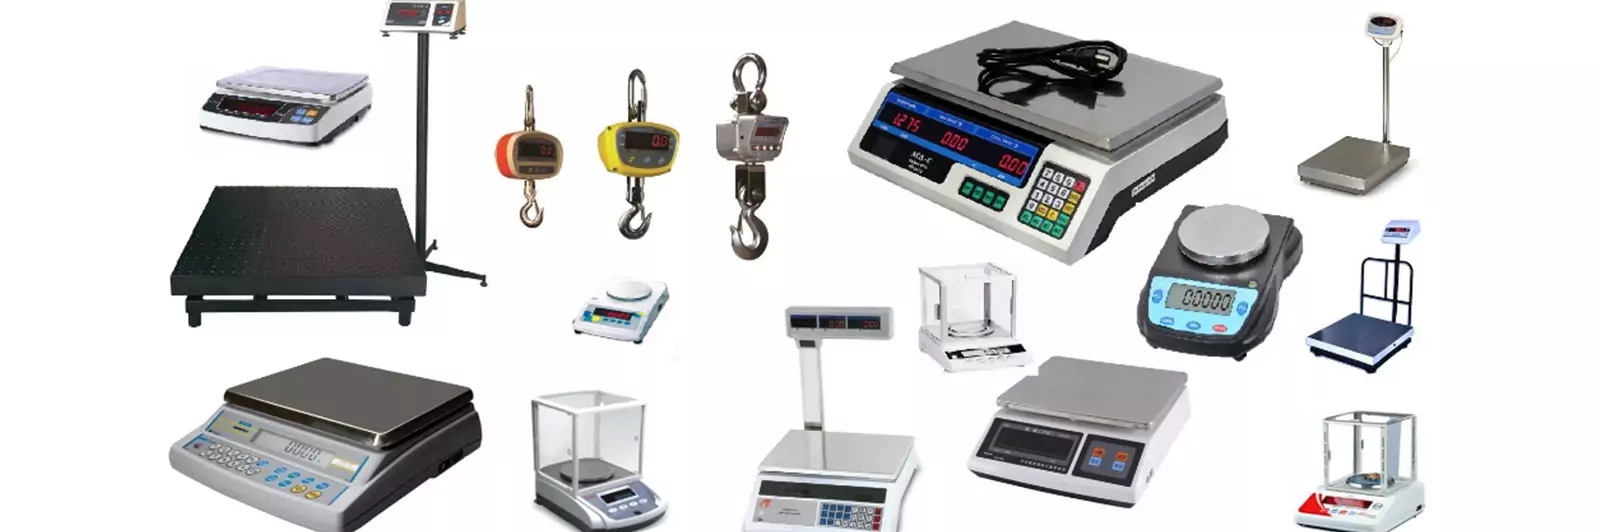 Weighing Scales Supplier In Dubai